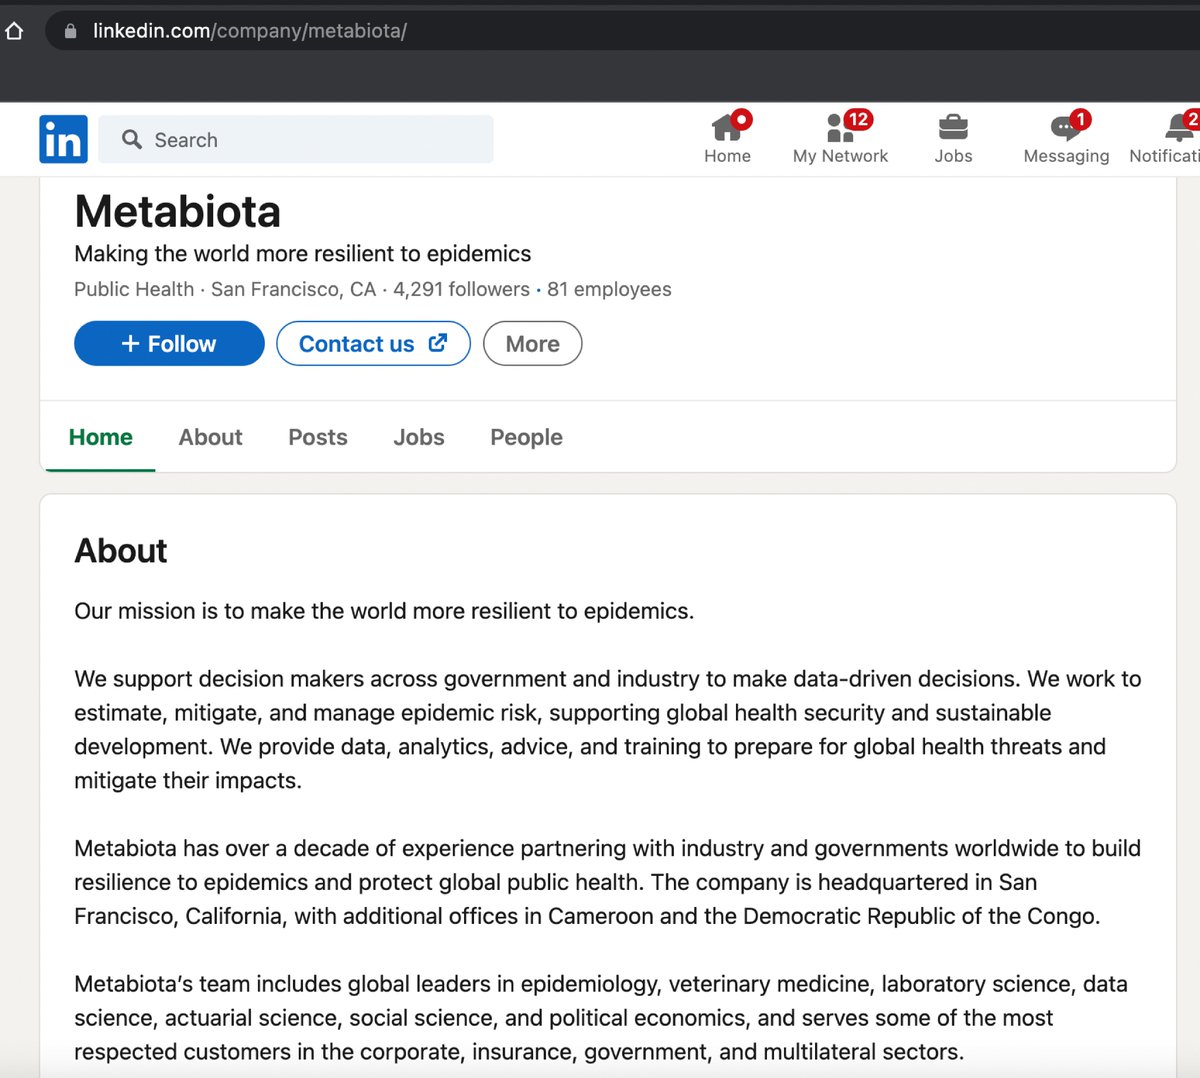 @SpartaJustice Do you know who also works in the 'Veterinary Medicine' and 'Laboratory Science' space? Metabiota.